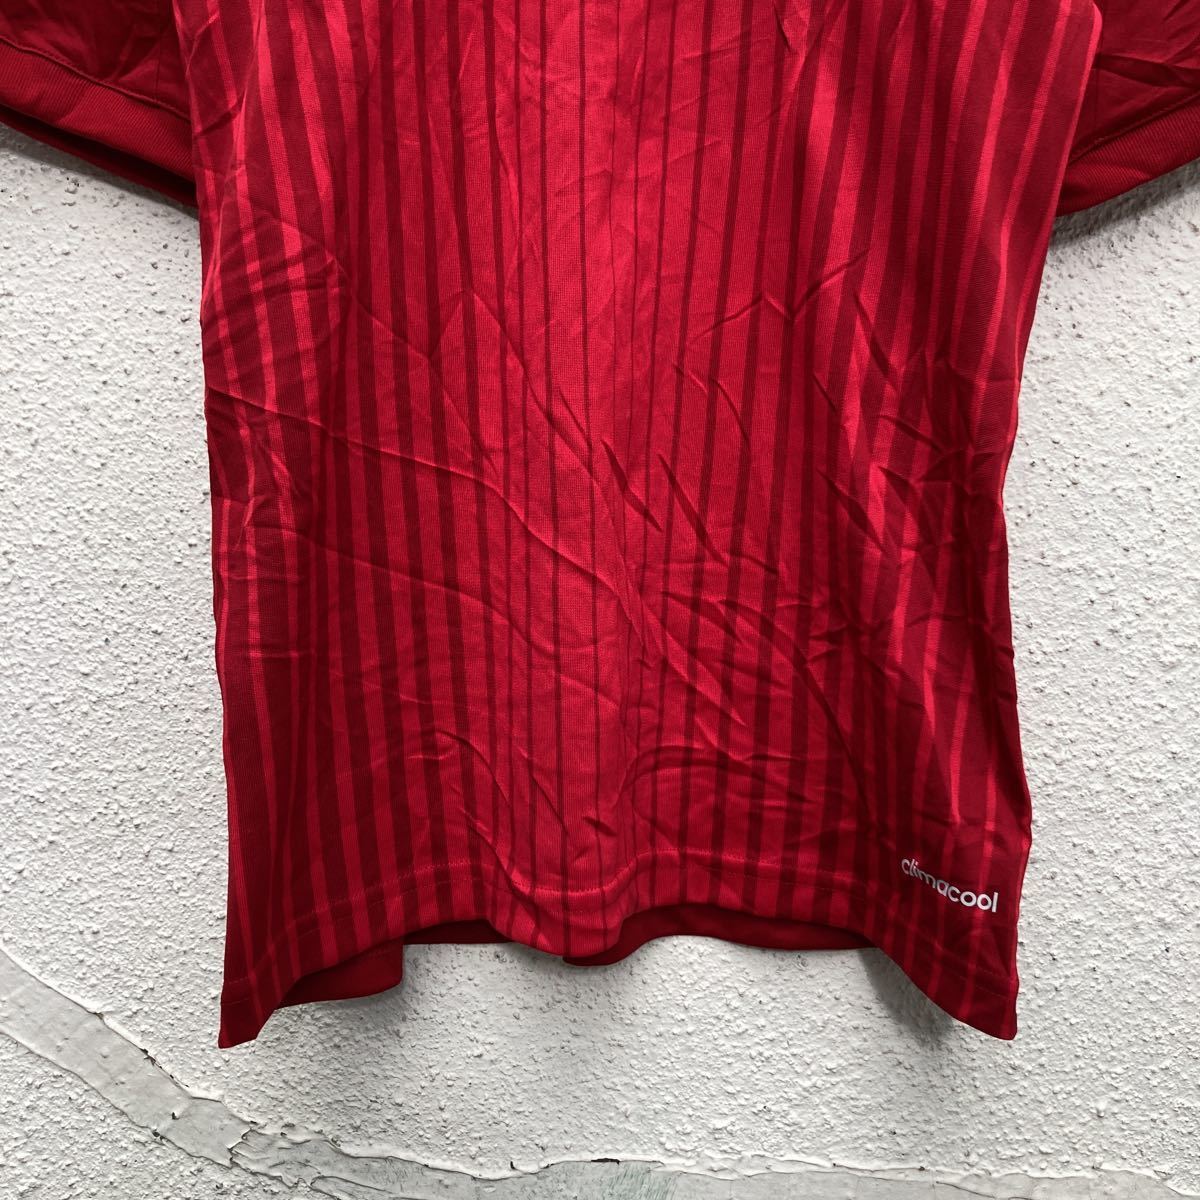 adidas short sleeves T-shirt Kids 150 red Gold Adidas sport wear soccer old clothes . America buying up a505-6091